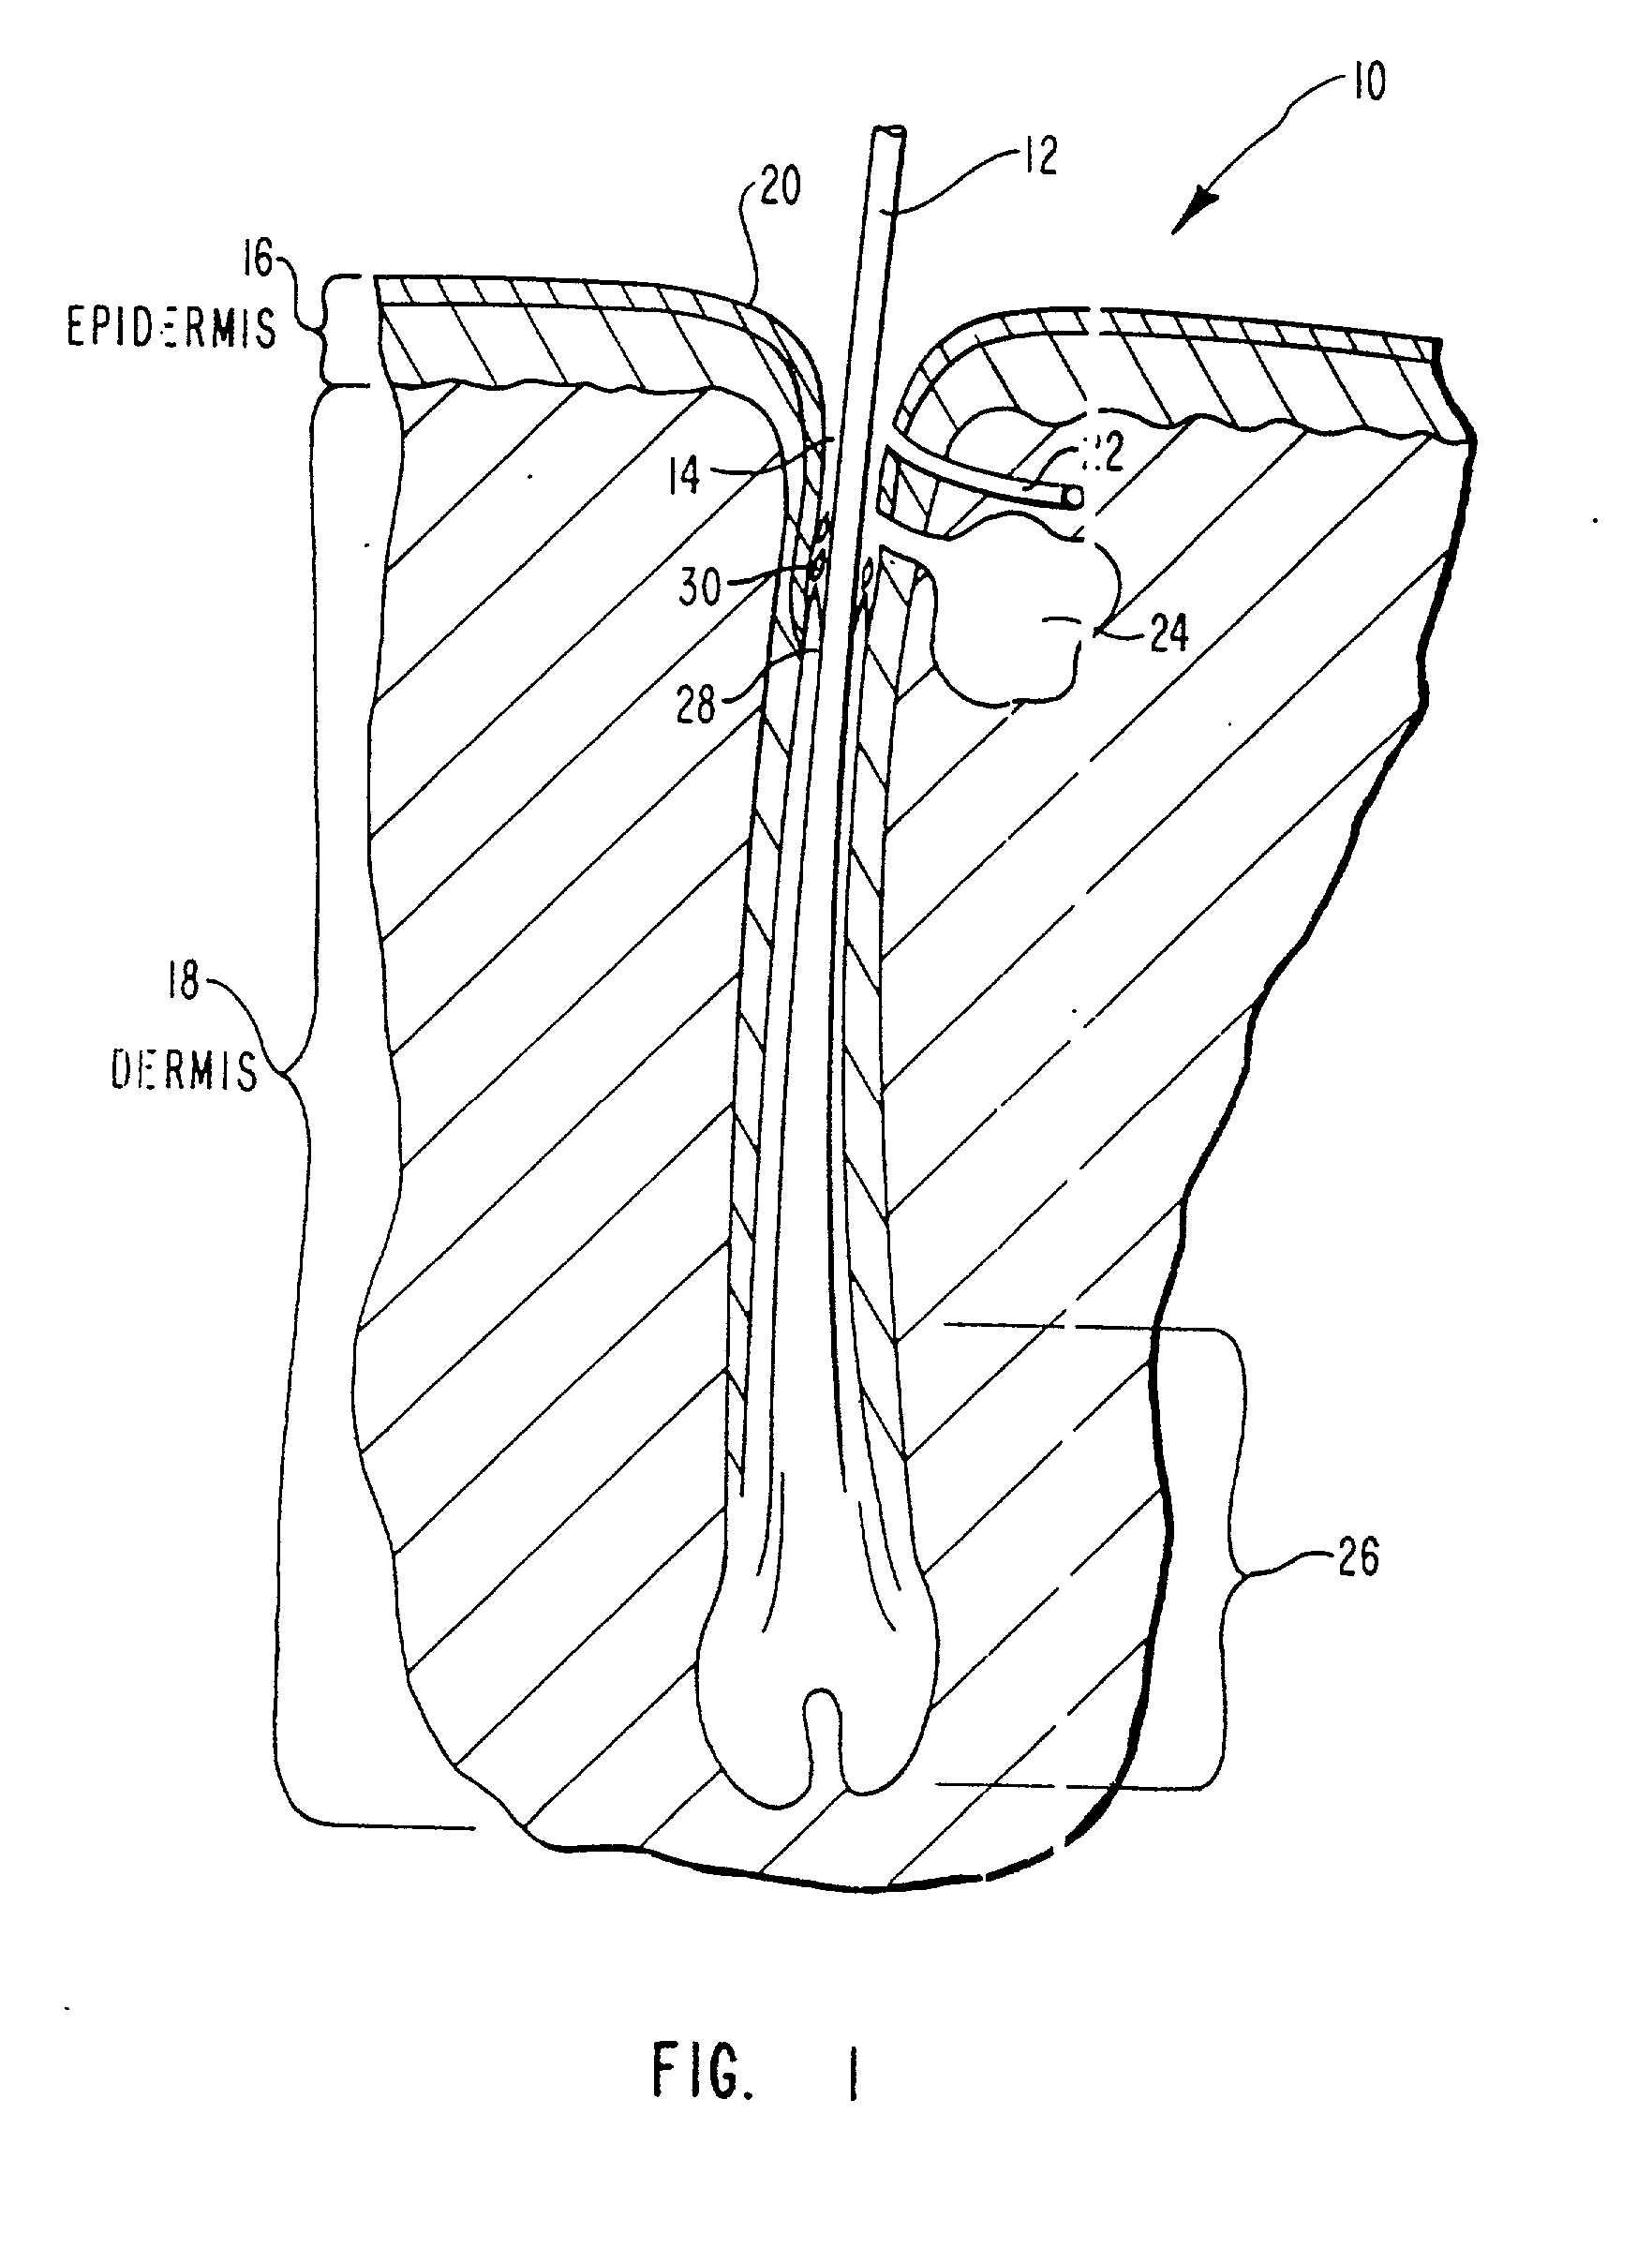 Skin treatment with a water soluble antibiotic dissolved in an electrolyzed water